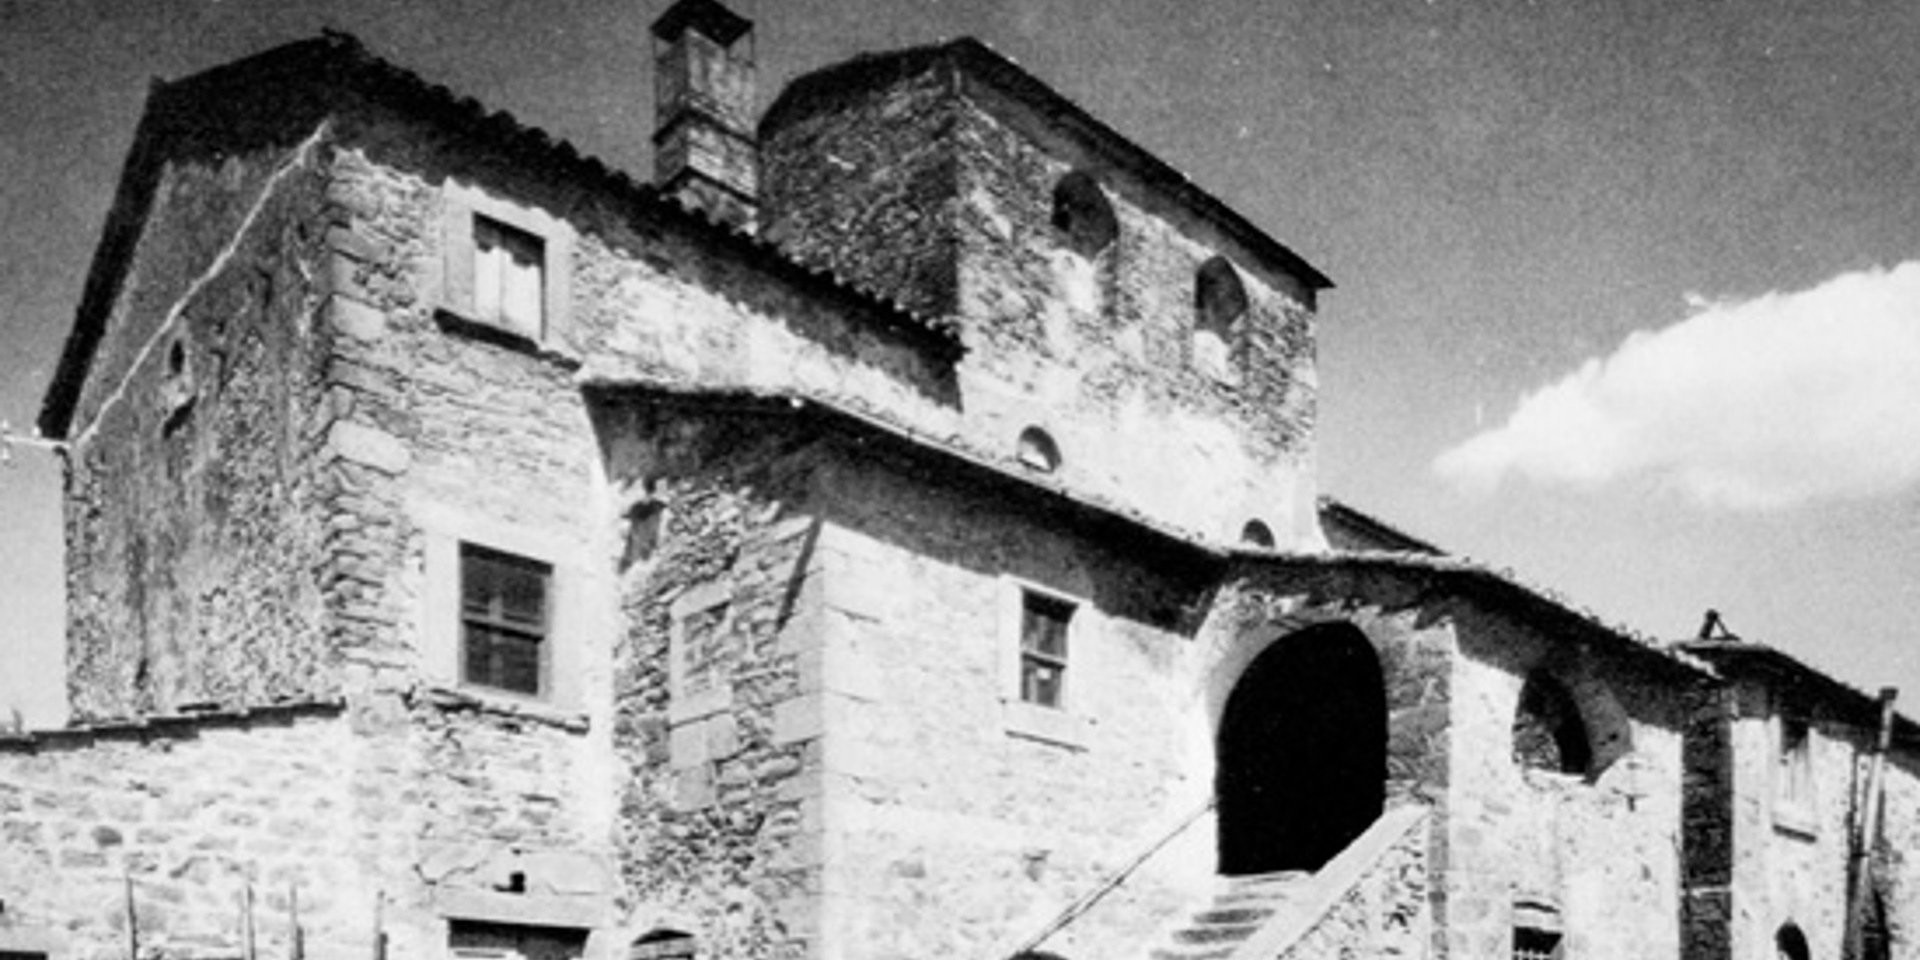 Black and white photo: a detail of the ancient building - Monastero
					San Silvestro